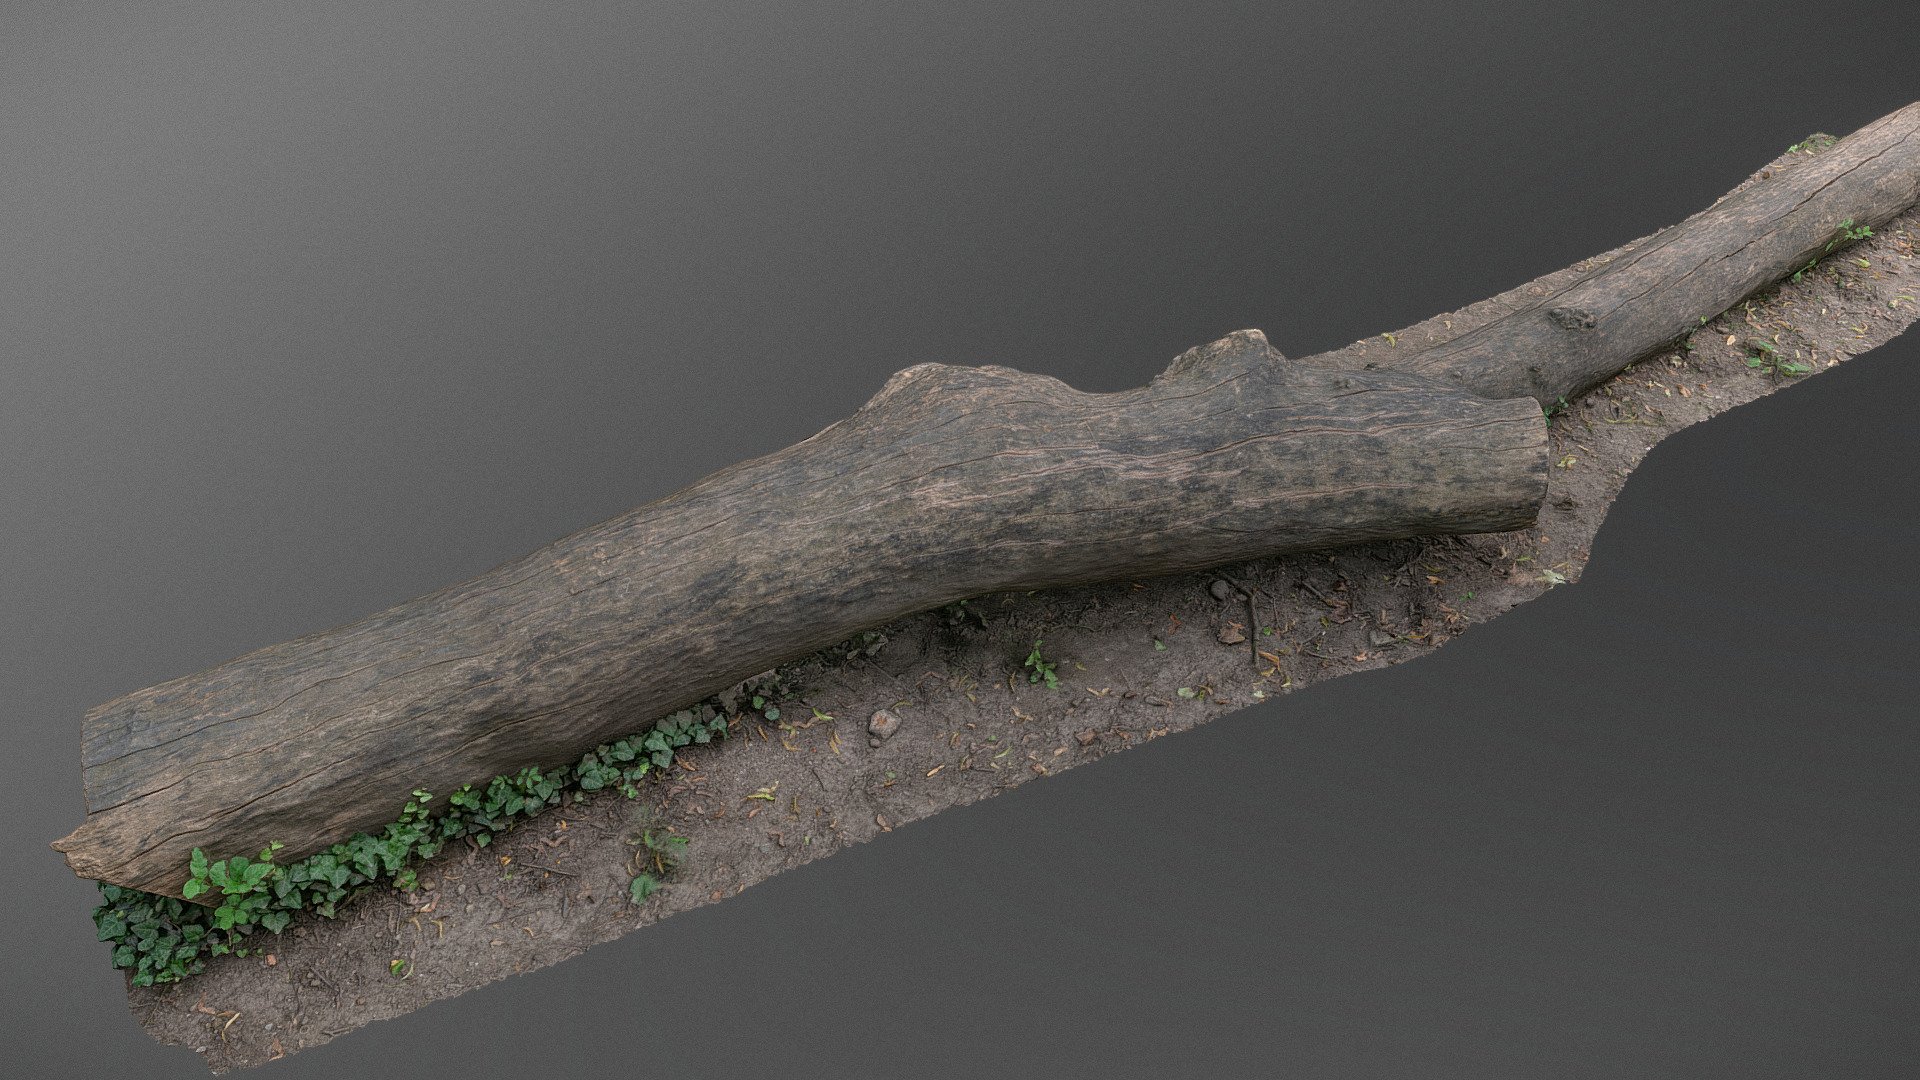 Thick Ash tree trunk lumber wood log cut fallen down on ground in city park, serving as a bench, timber material isolated with some ivy growing over

photogrammetry scan (240x24MP), 3x16K textures + Normals from 3M tris - Ivy trunk - Download Free 3D model by matousekfoto 3d model